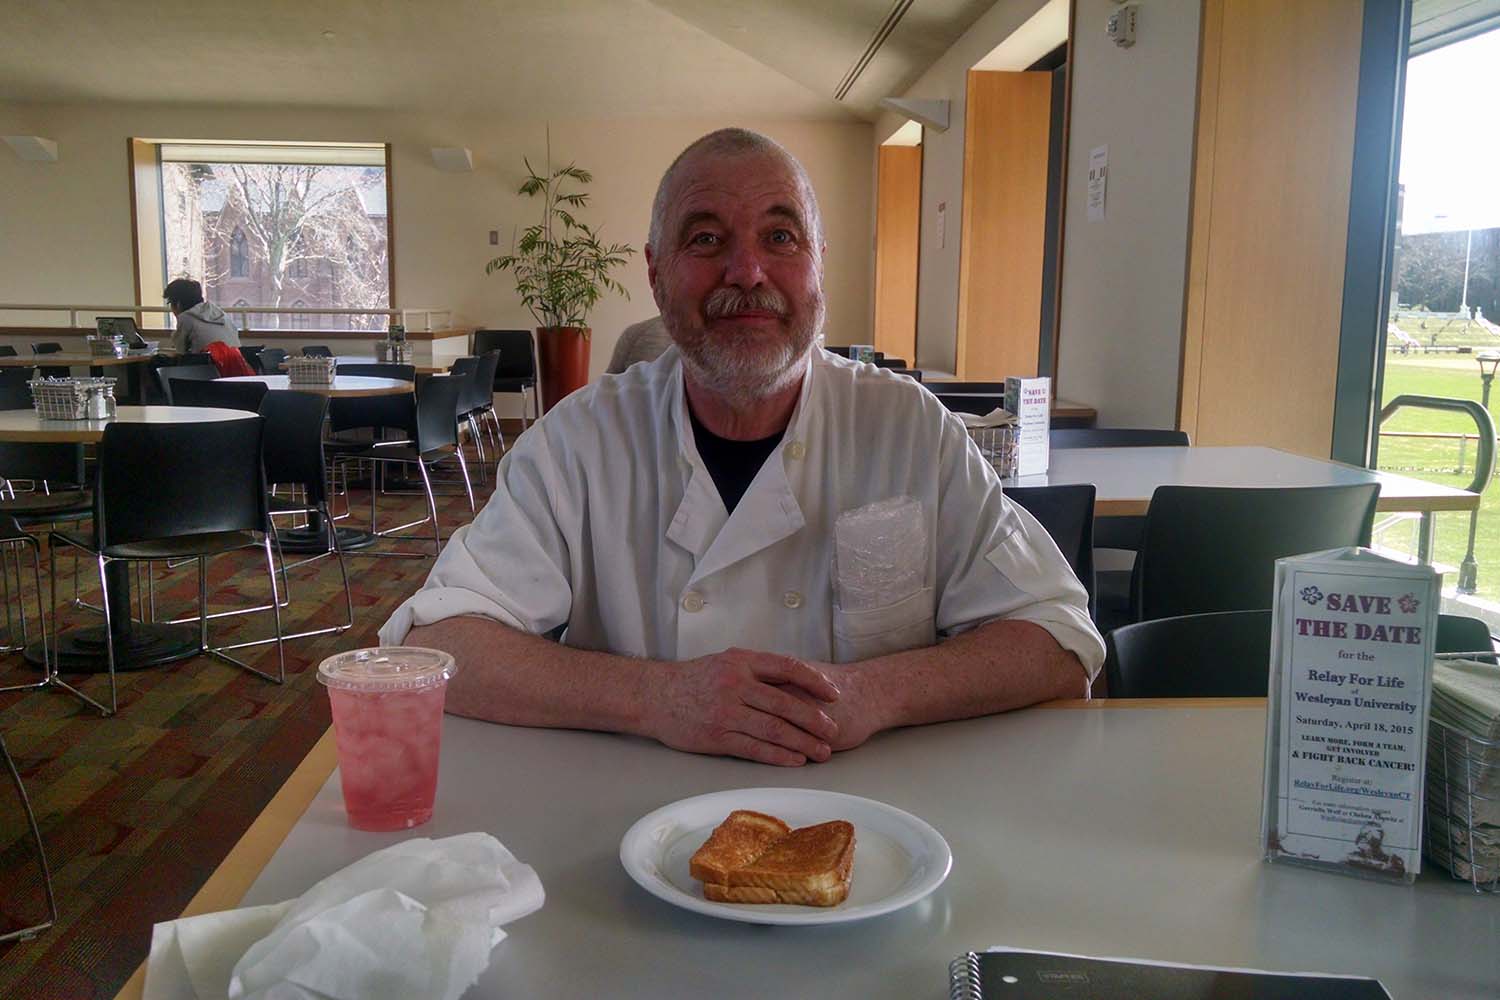 David Csere, winner of the Morgenstern-Clarren Social Justice Award, is known for his legendary grilled cheese sandwiches and knack for memorizing student's birthdays.